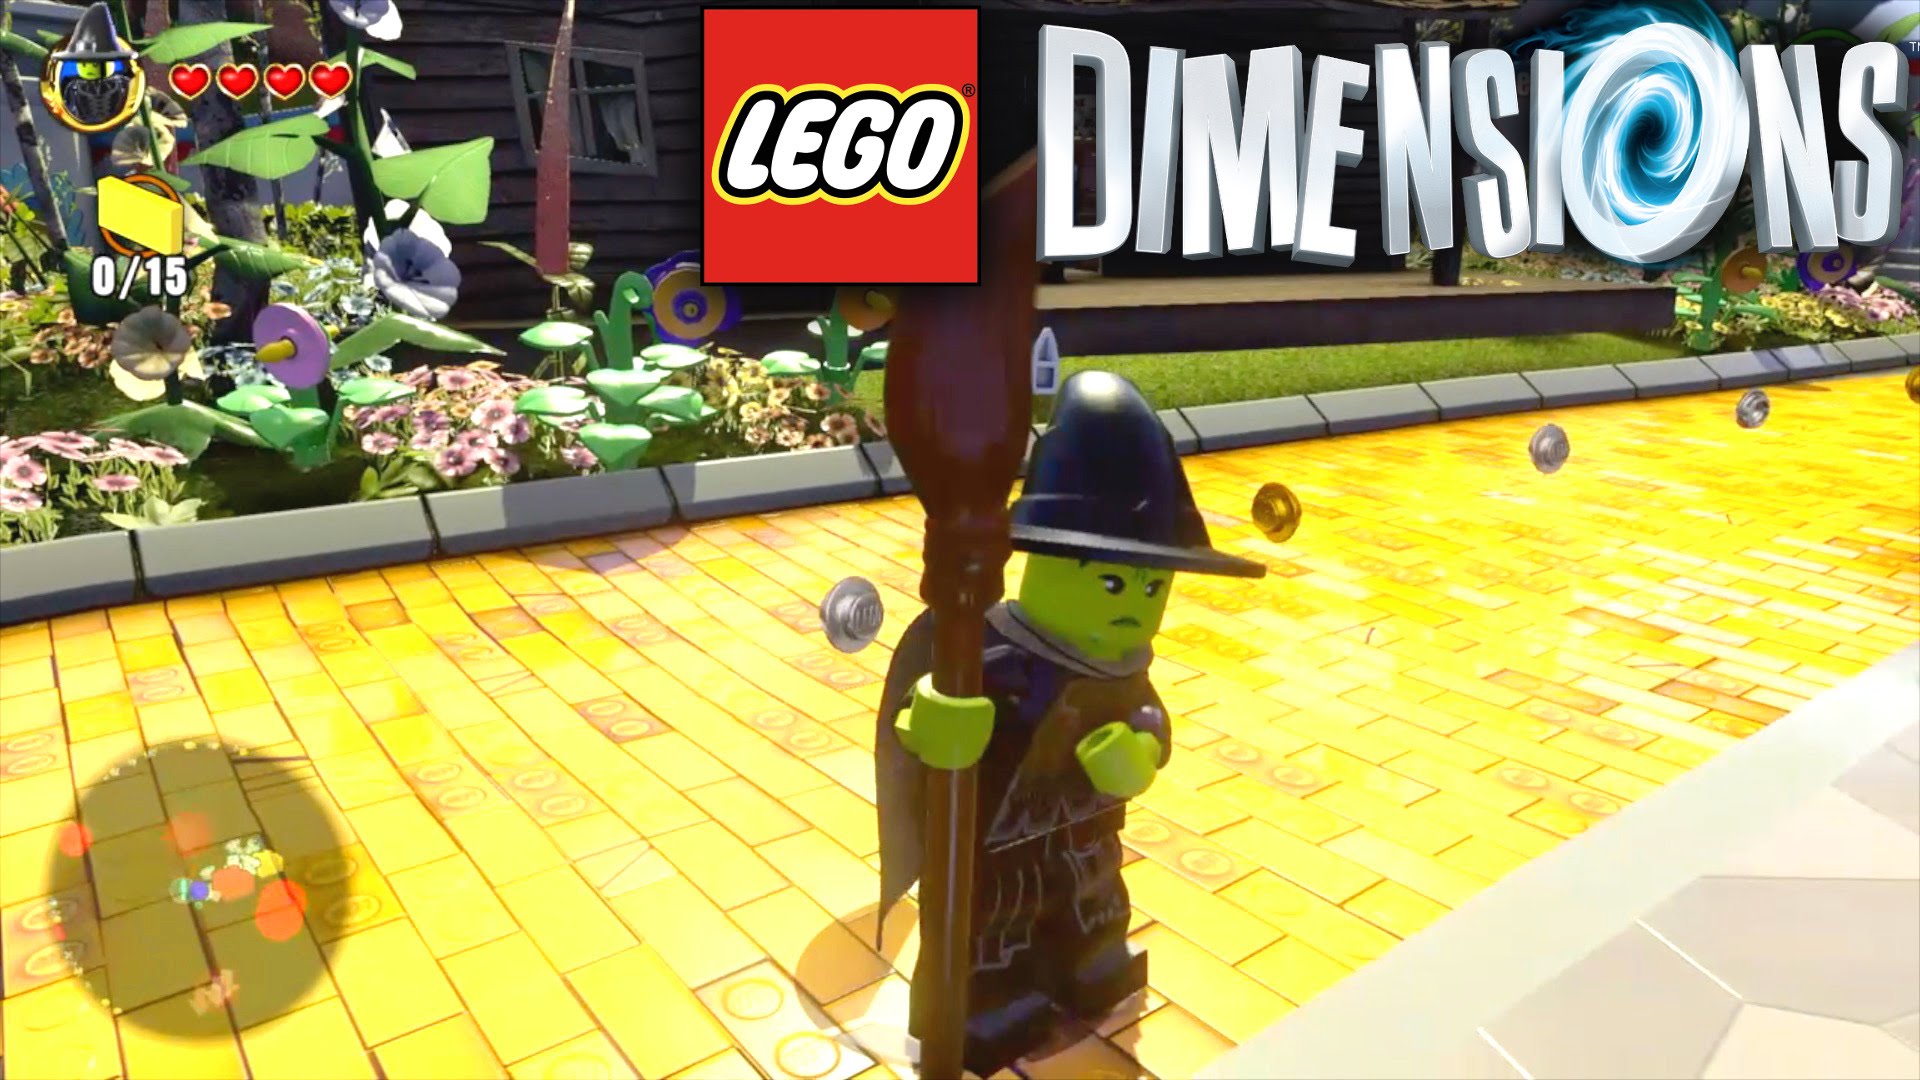 Lego Dimensions “The Wizard of Oz” Adventure World Guide #10